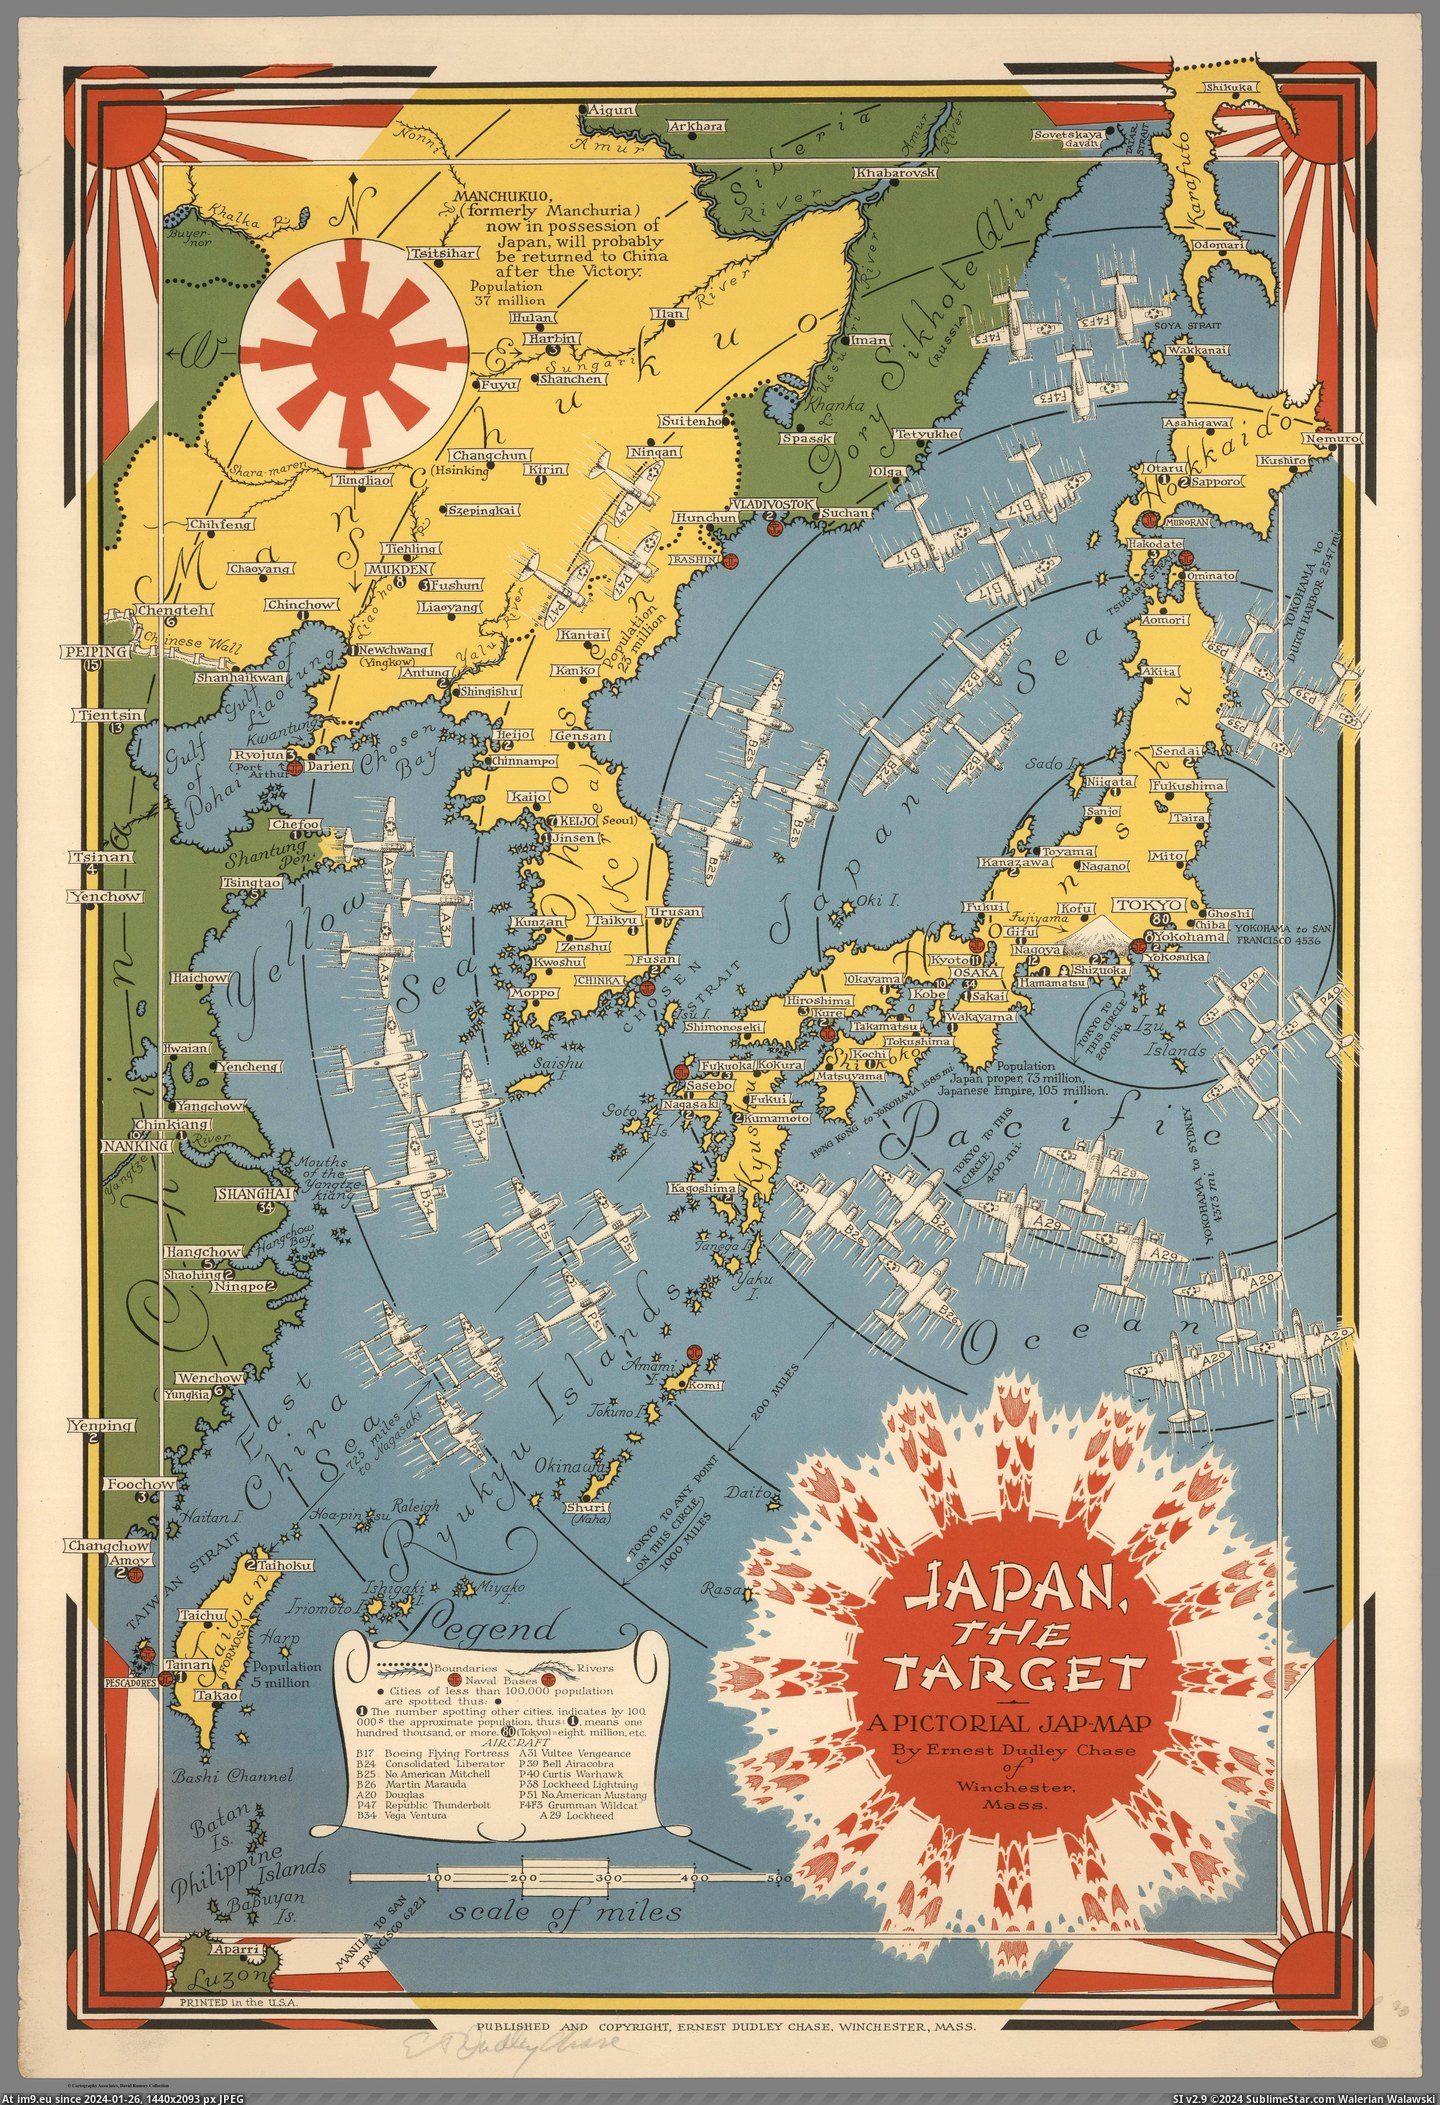 #Map #Japan #Ernest #Pictorial #Dudley #Chase #Target [Mapporn] Japan the Target, a pictorial map made by Ernest Dudley Chase, 1942 [4003x5830] Pic. (Image of album My r/MAPS favs))